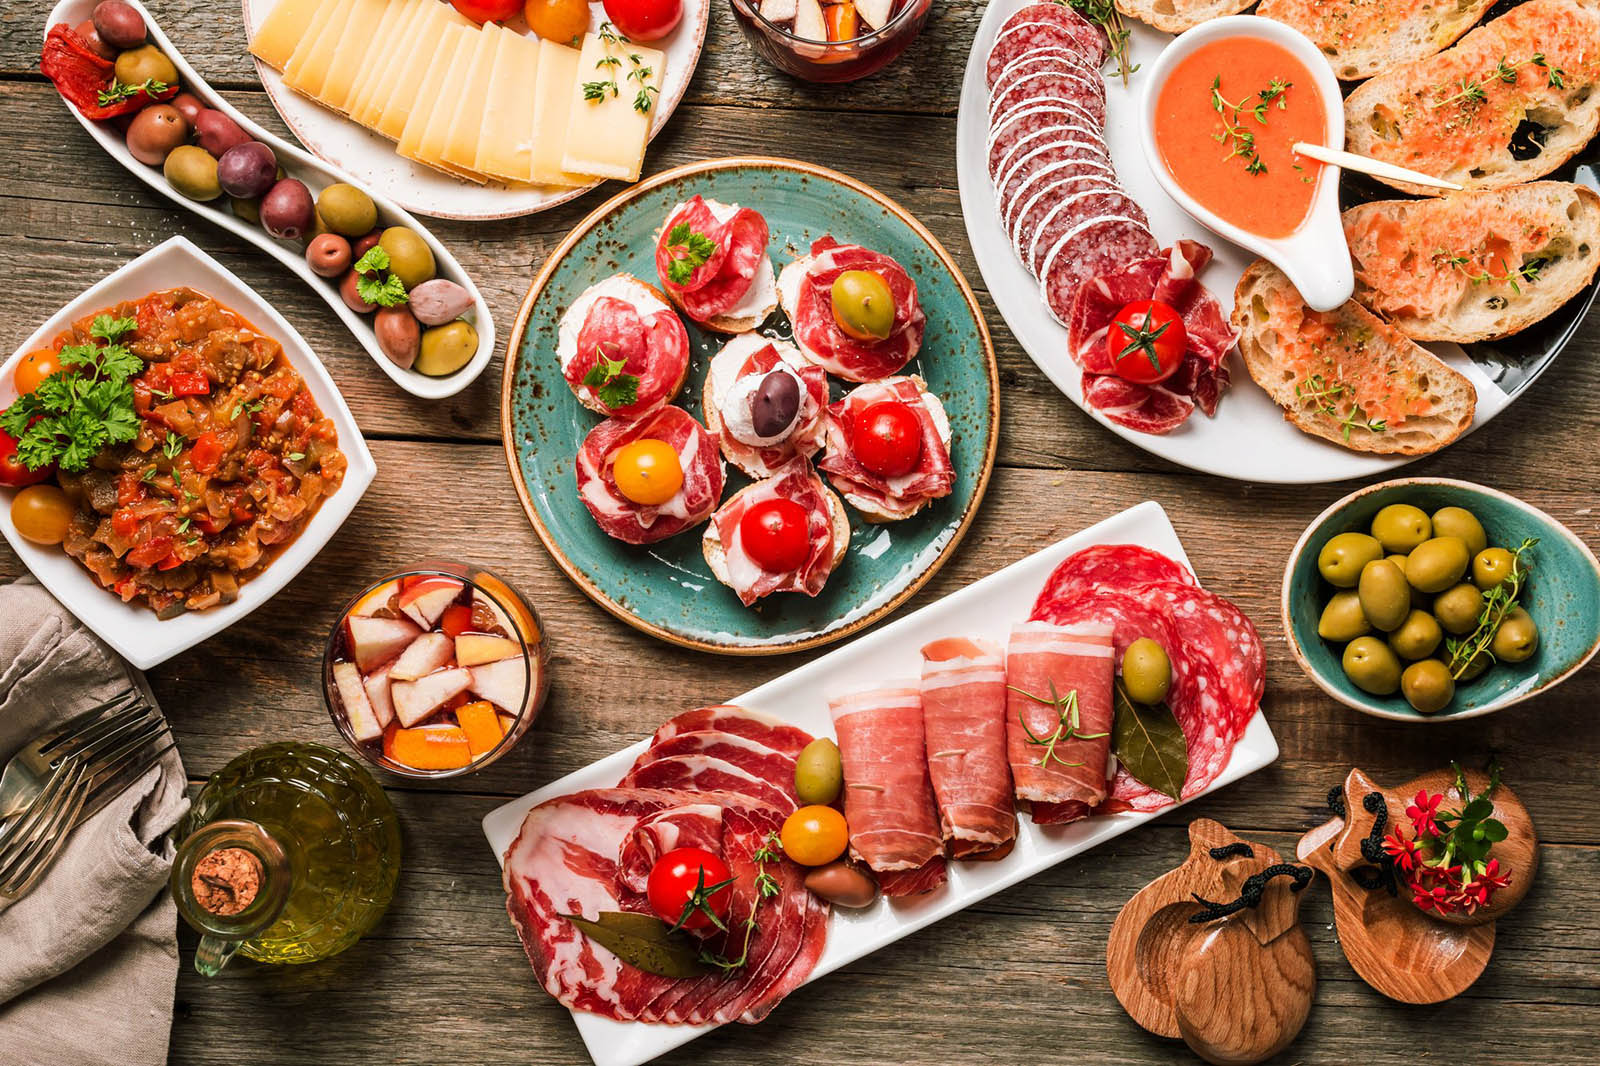 Wanna Know If You Have Enough General Knowledge? Take This Quiz to Find Out Spanish cuisine